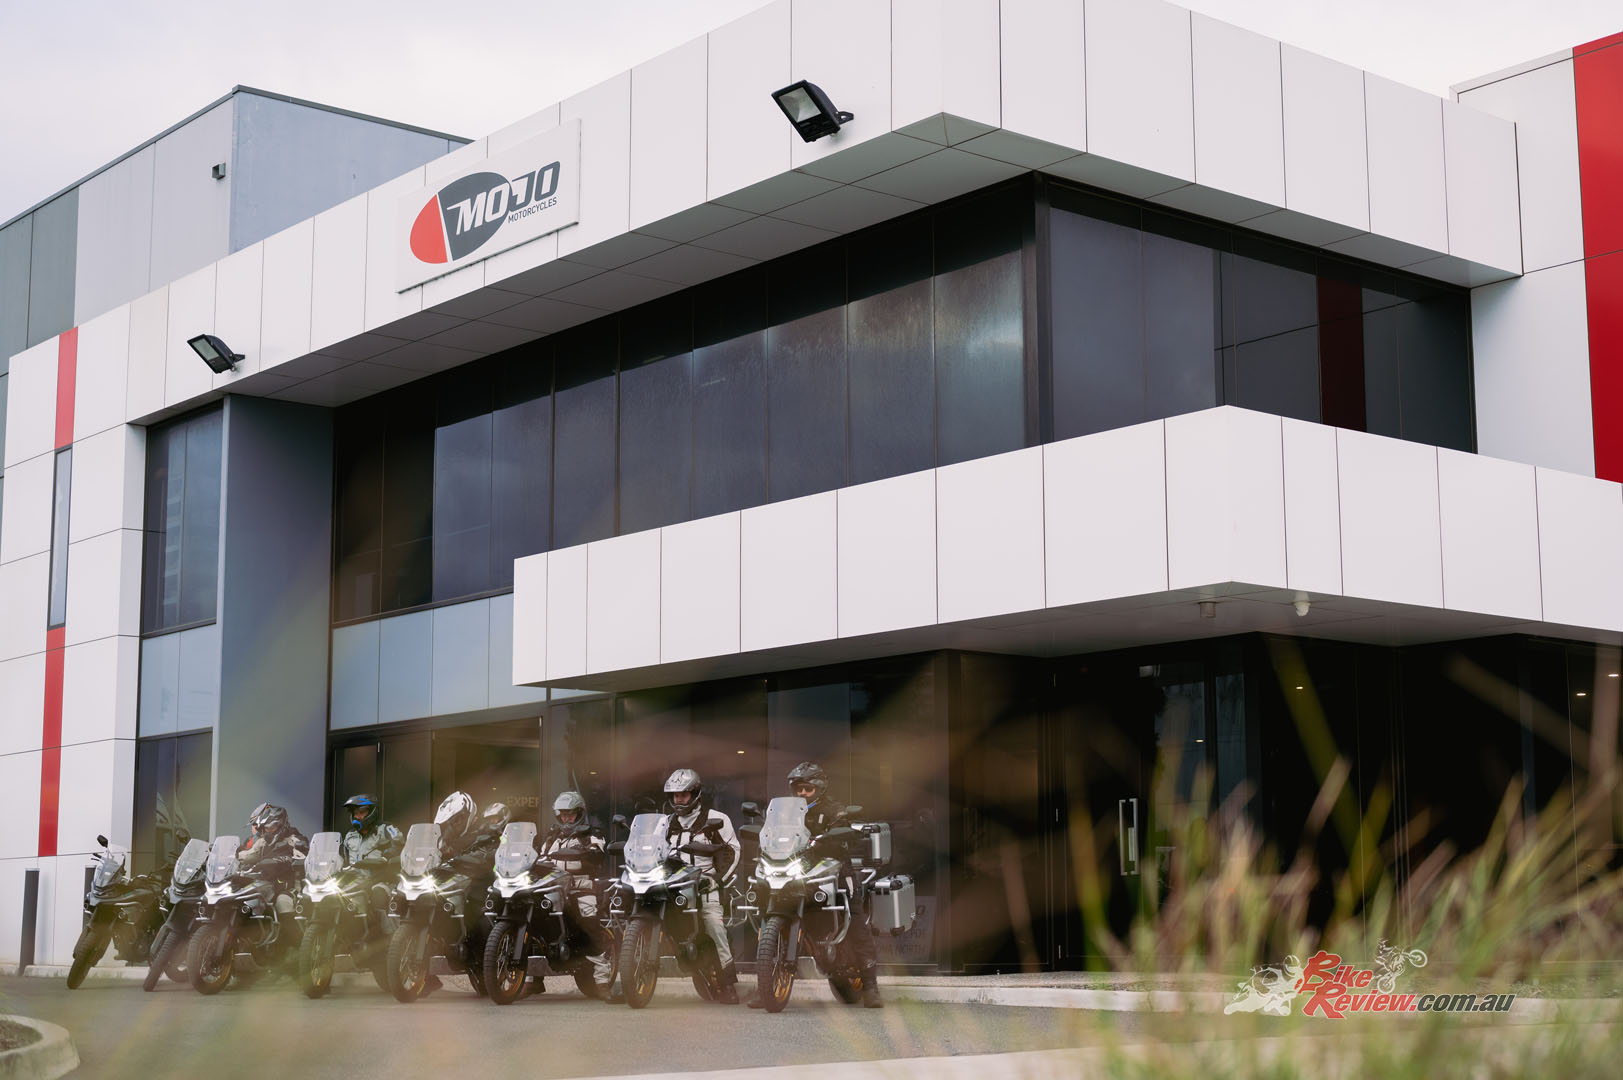 MOJO HQ, in Altona, Victoria, was the starting point for their expedition. They had about a 400-450km ride East out of the city before everyone arrived at their first overnight stay.